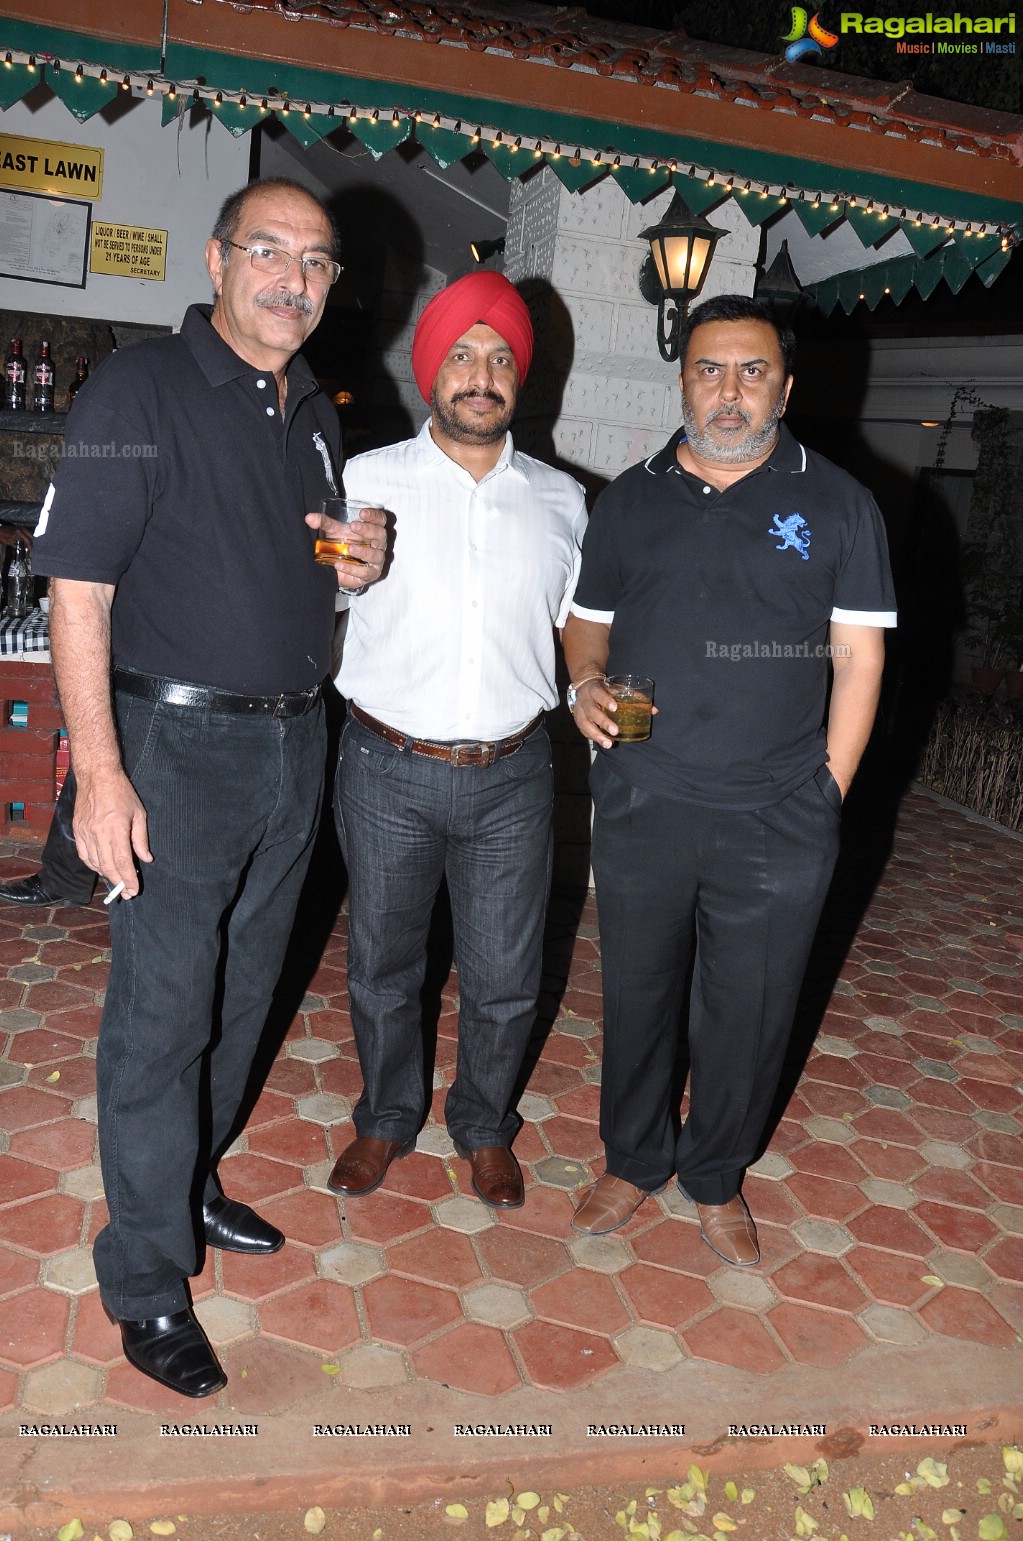 RAAP's Cocktail and Dinner Party at Secunderabad Club, Hyderabad